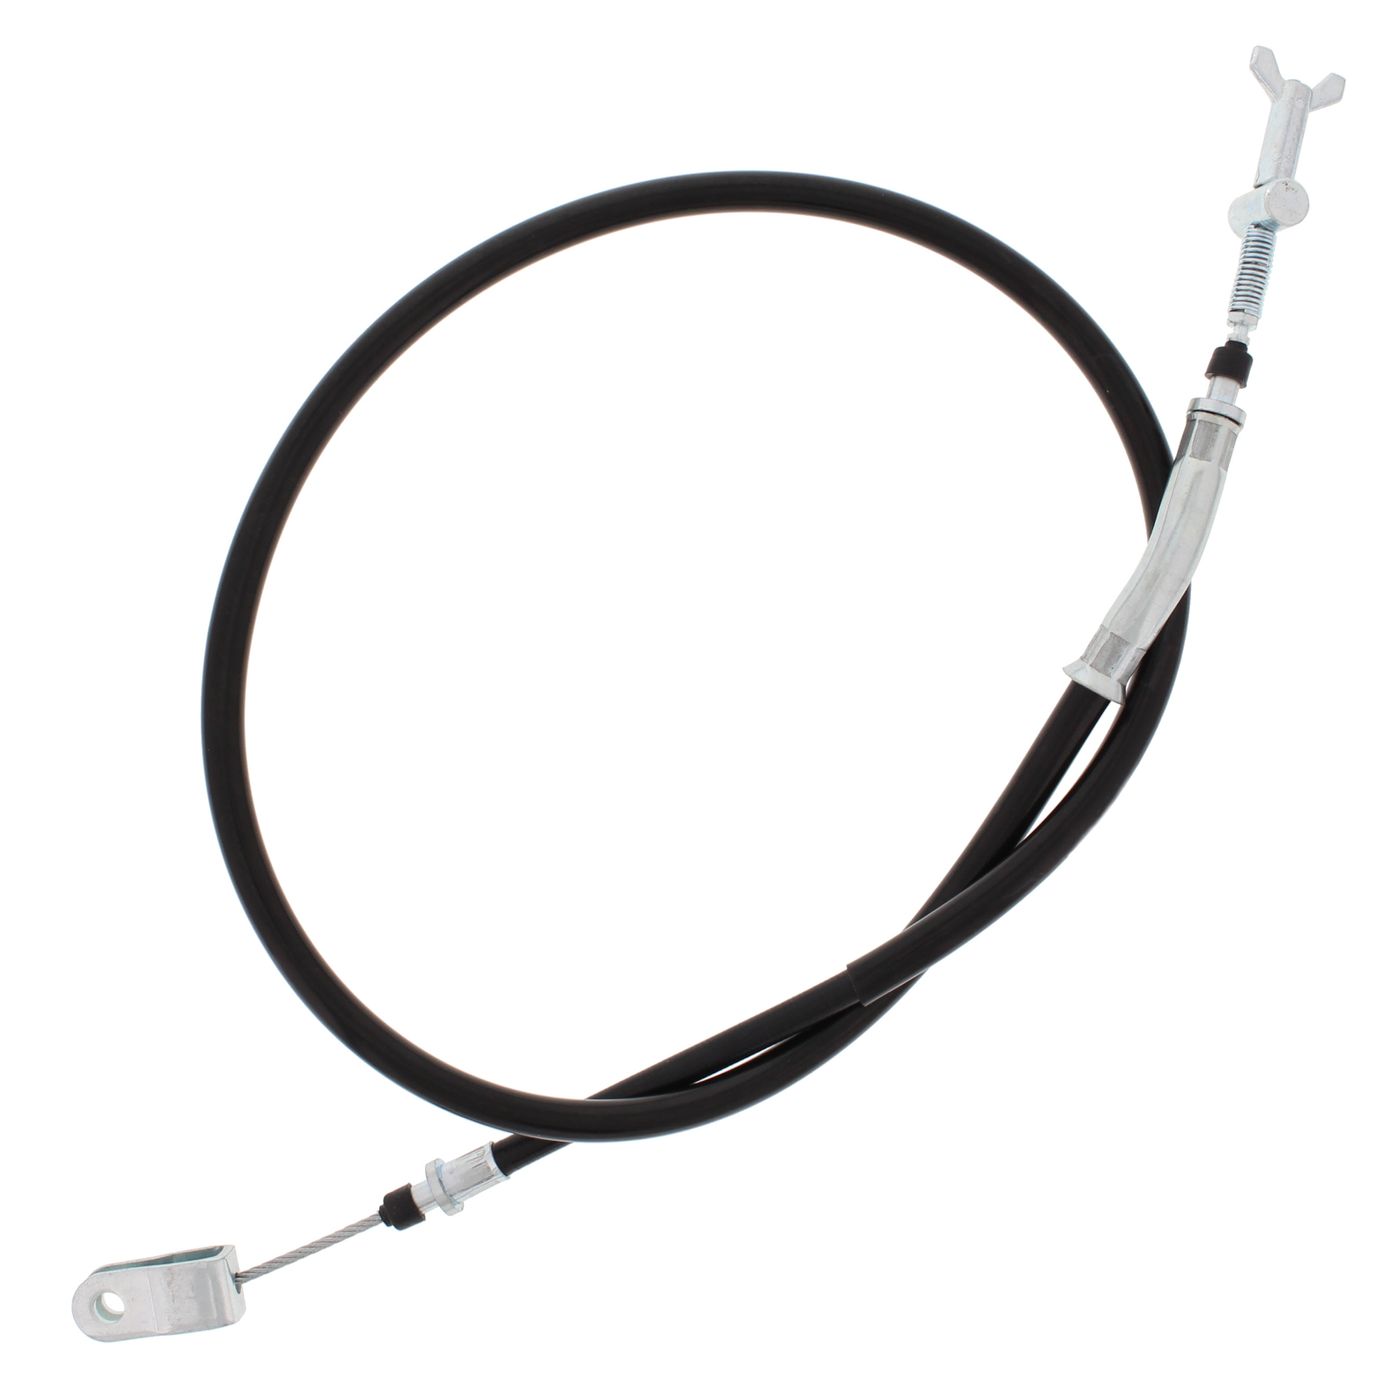 Wrp Brake Cables - WRP454052 image